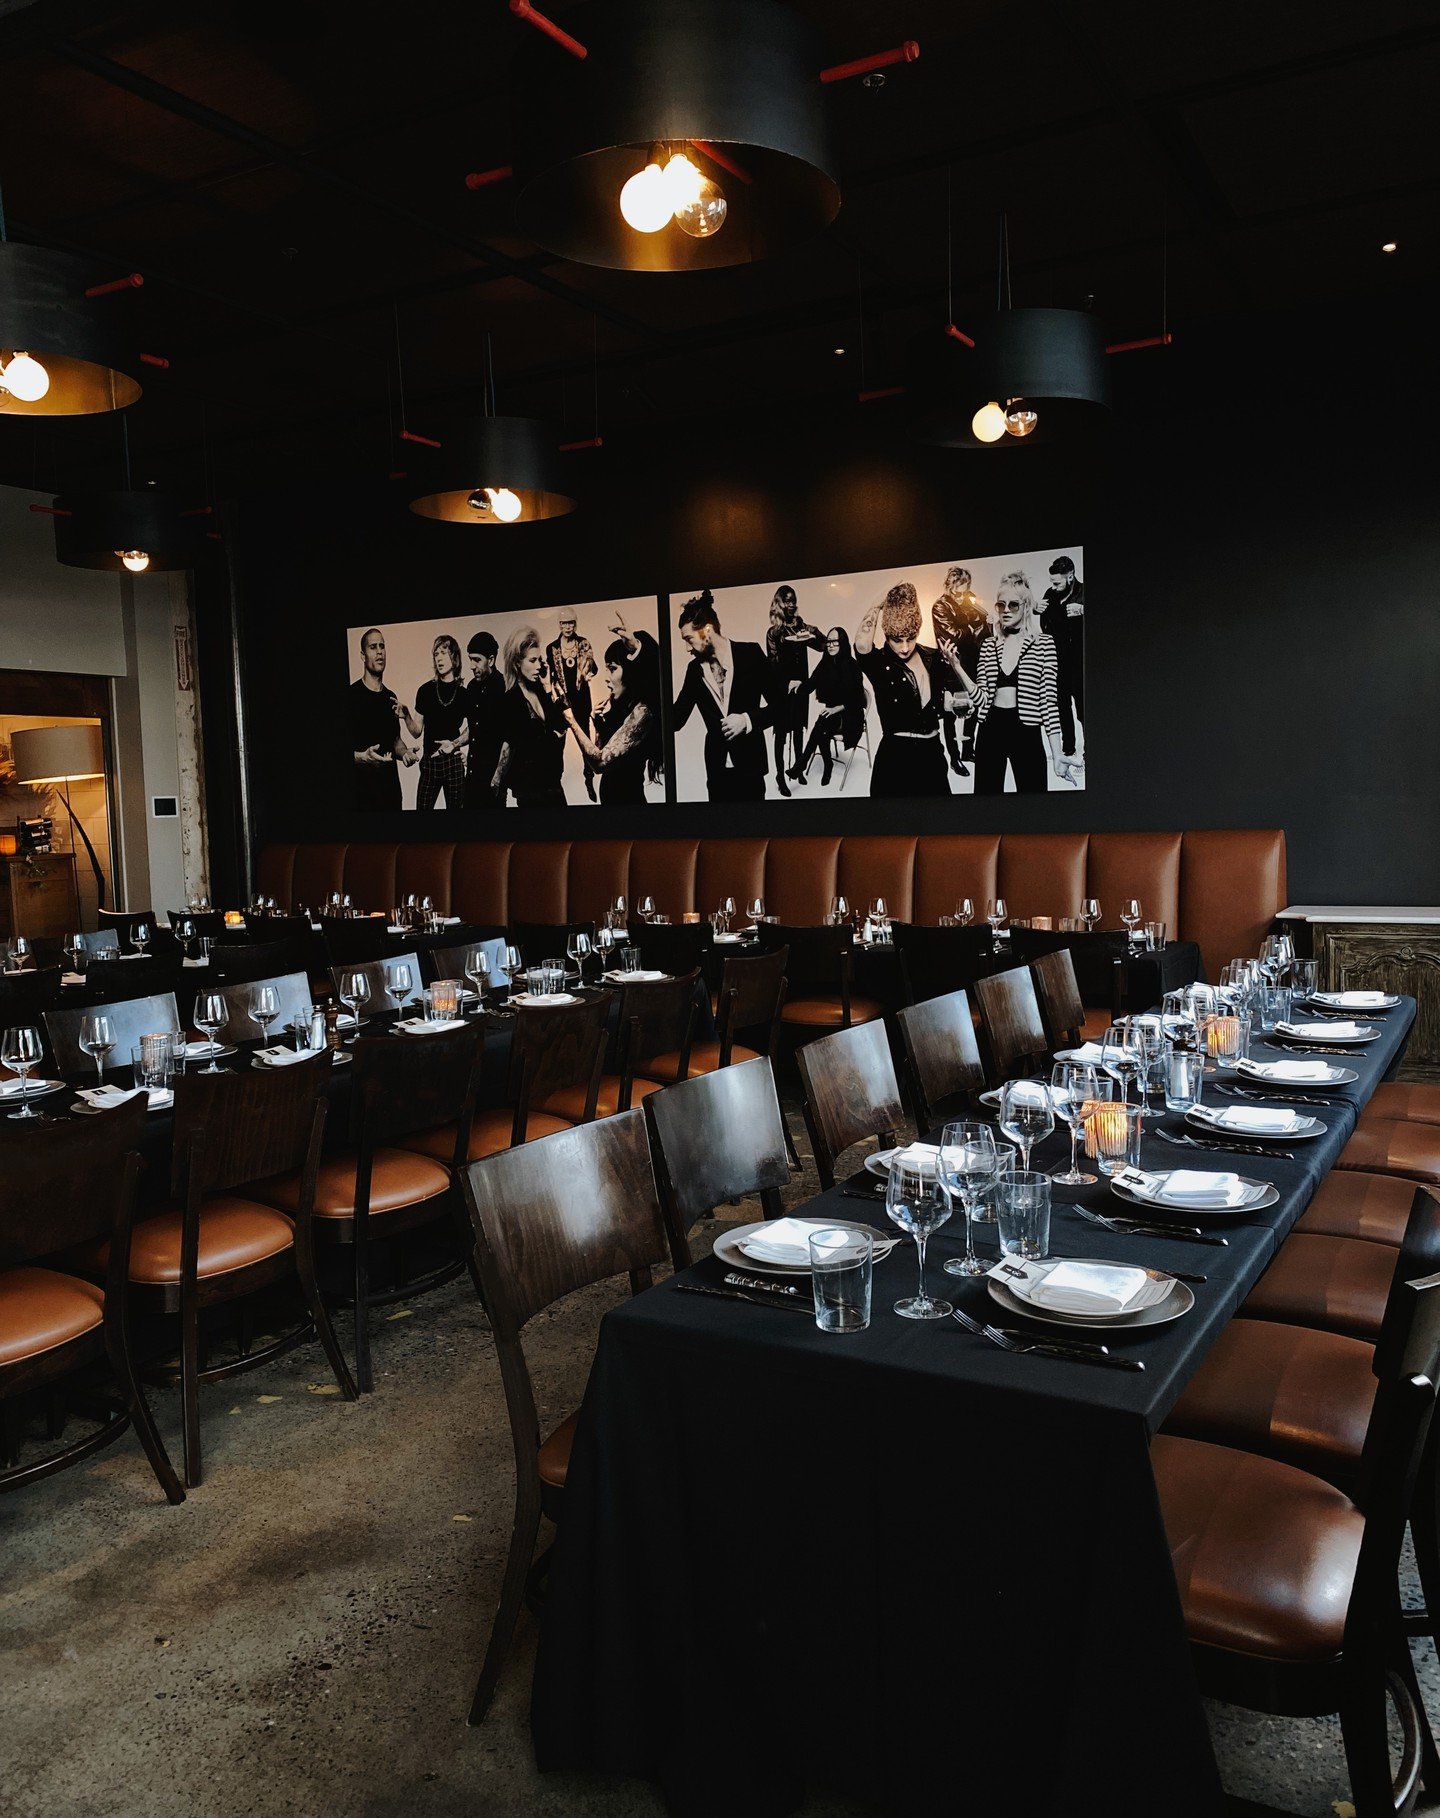 Turn your moments into memories at 6Smith! Plan your next bash with us and let the good times flow. For all the juicy details on private dining, hit us up at party@6smith.com or follow the link in our bio!

#PartyPlanning #privatedining #6smith #lake